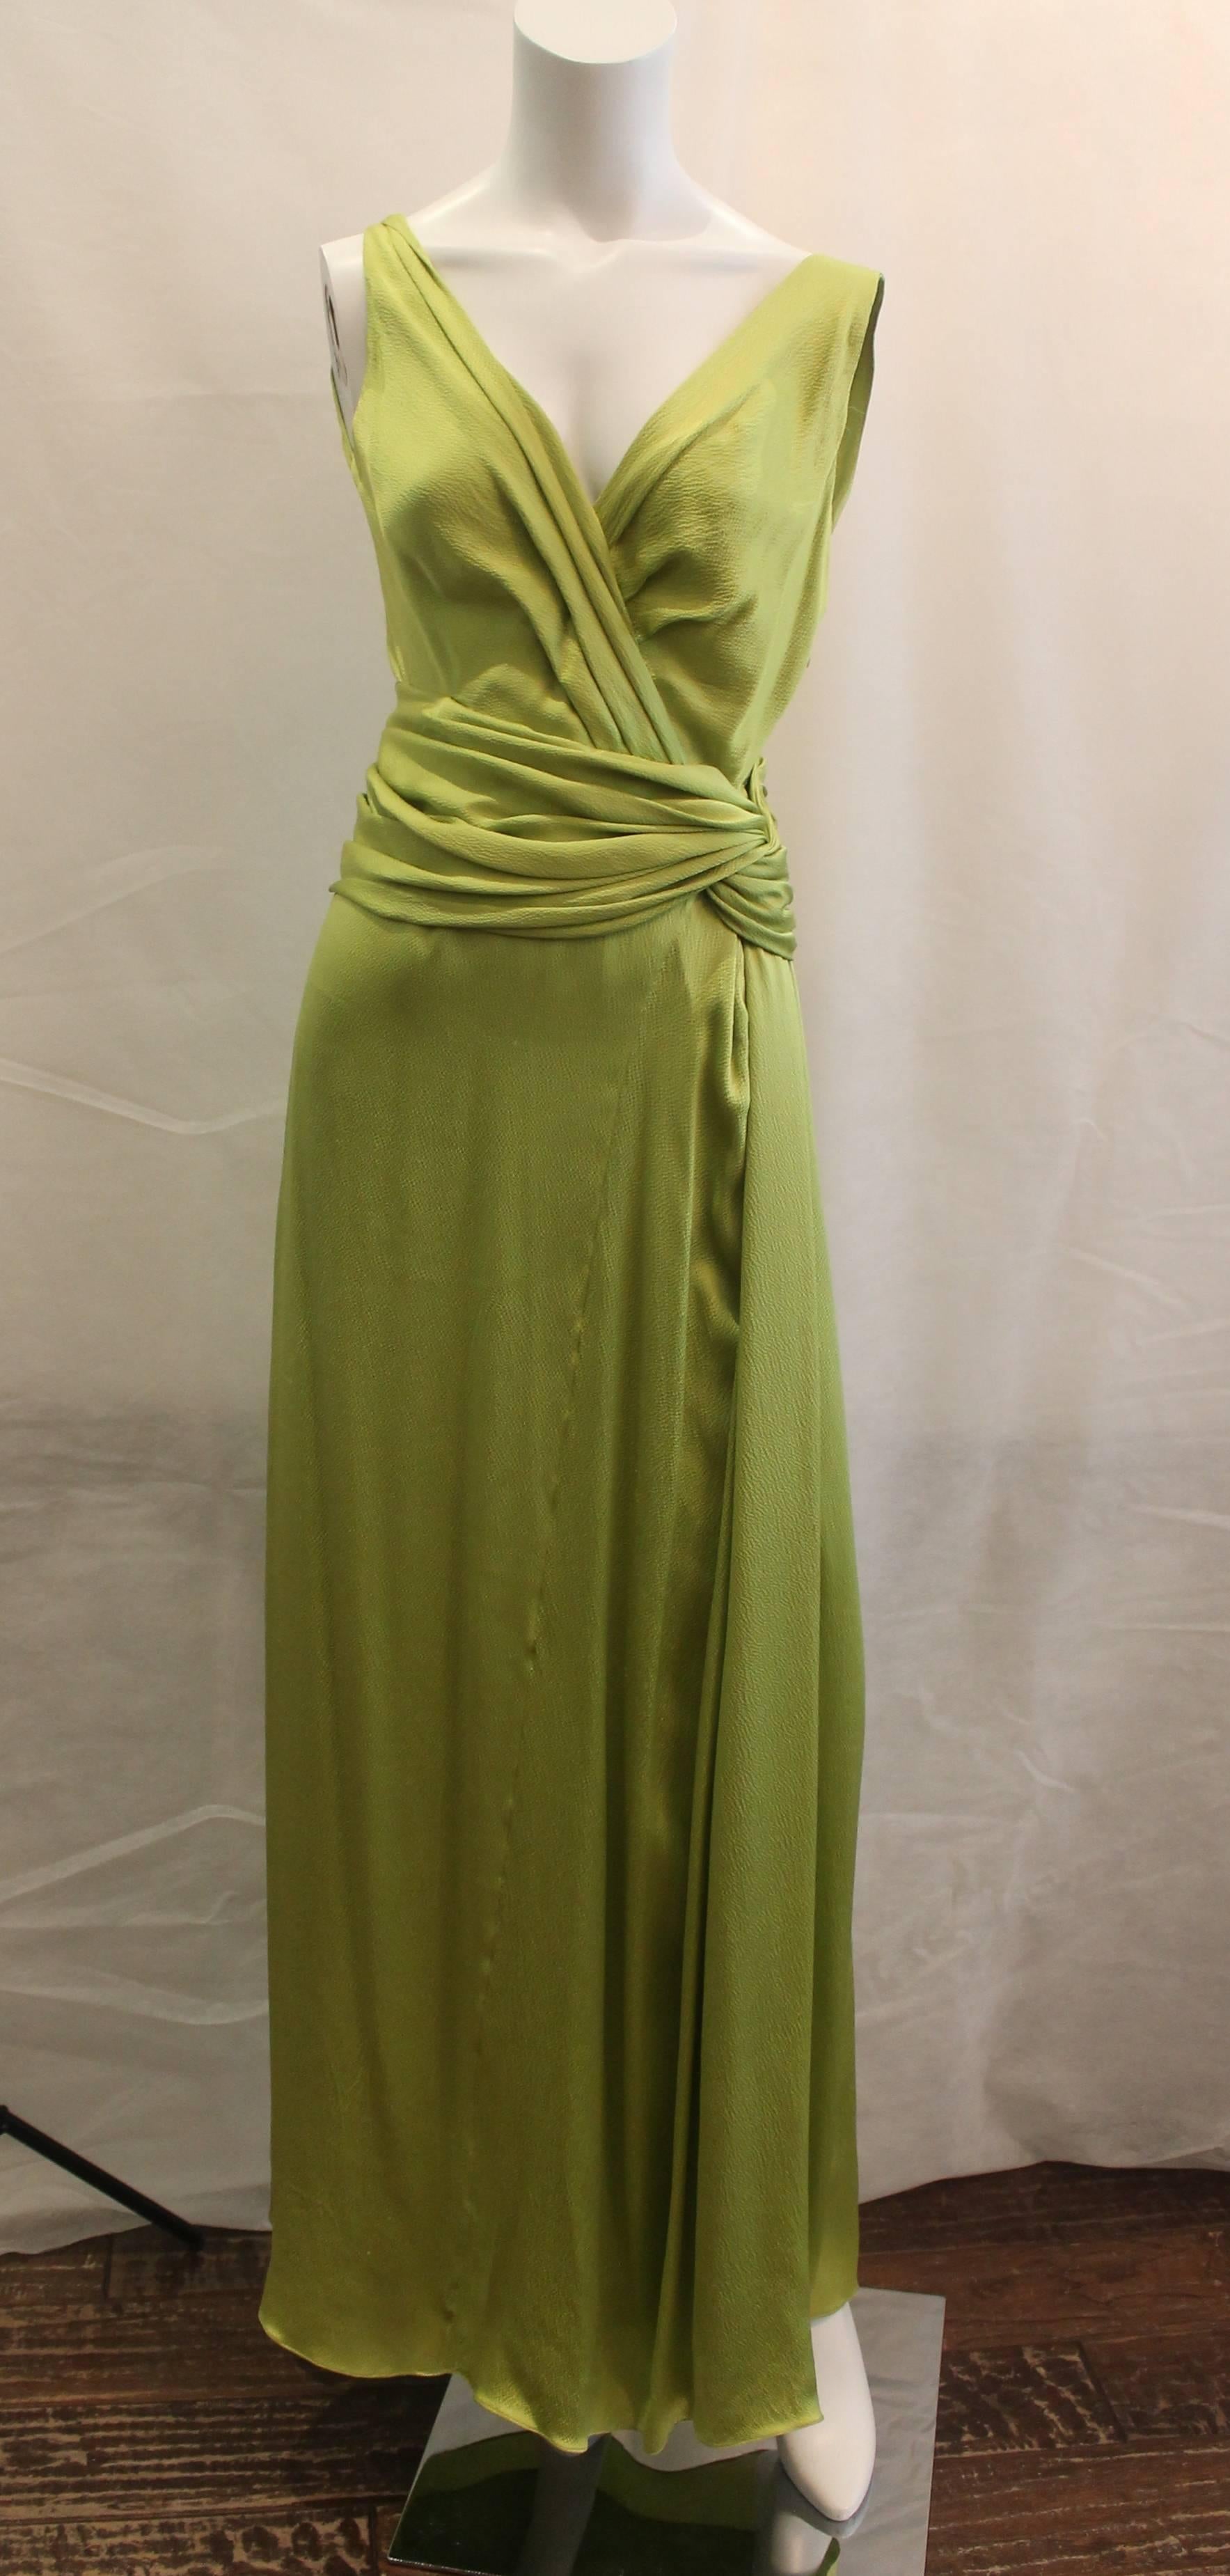 Christian Dior Canary Green Silk Sleeveless Ruched Gown - 2. This gown is in excellent condition with minor wear and has an extremely luxurious feel with its soft ruching throughout the bodice. This gown features a plunging v-neck, textured silk